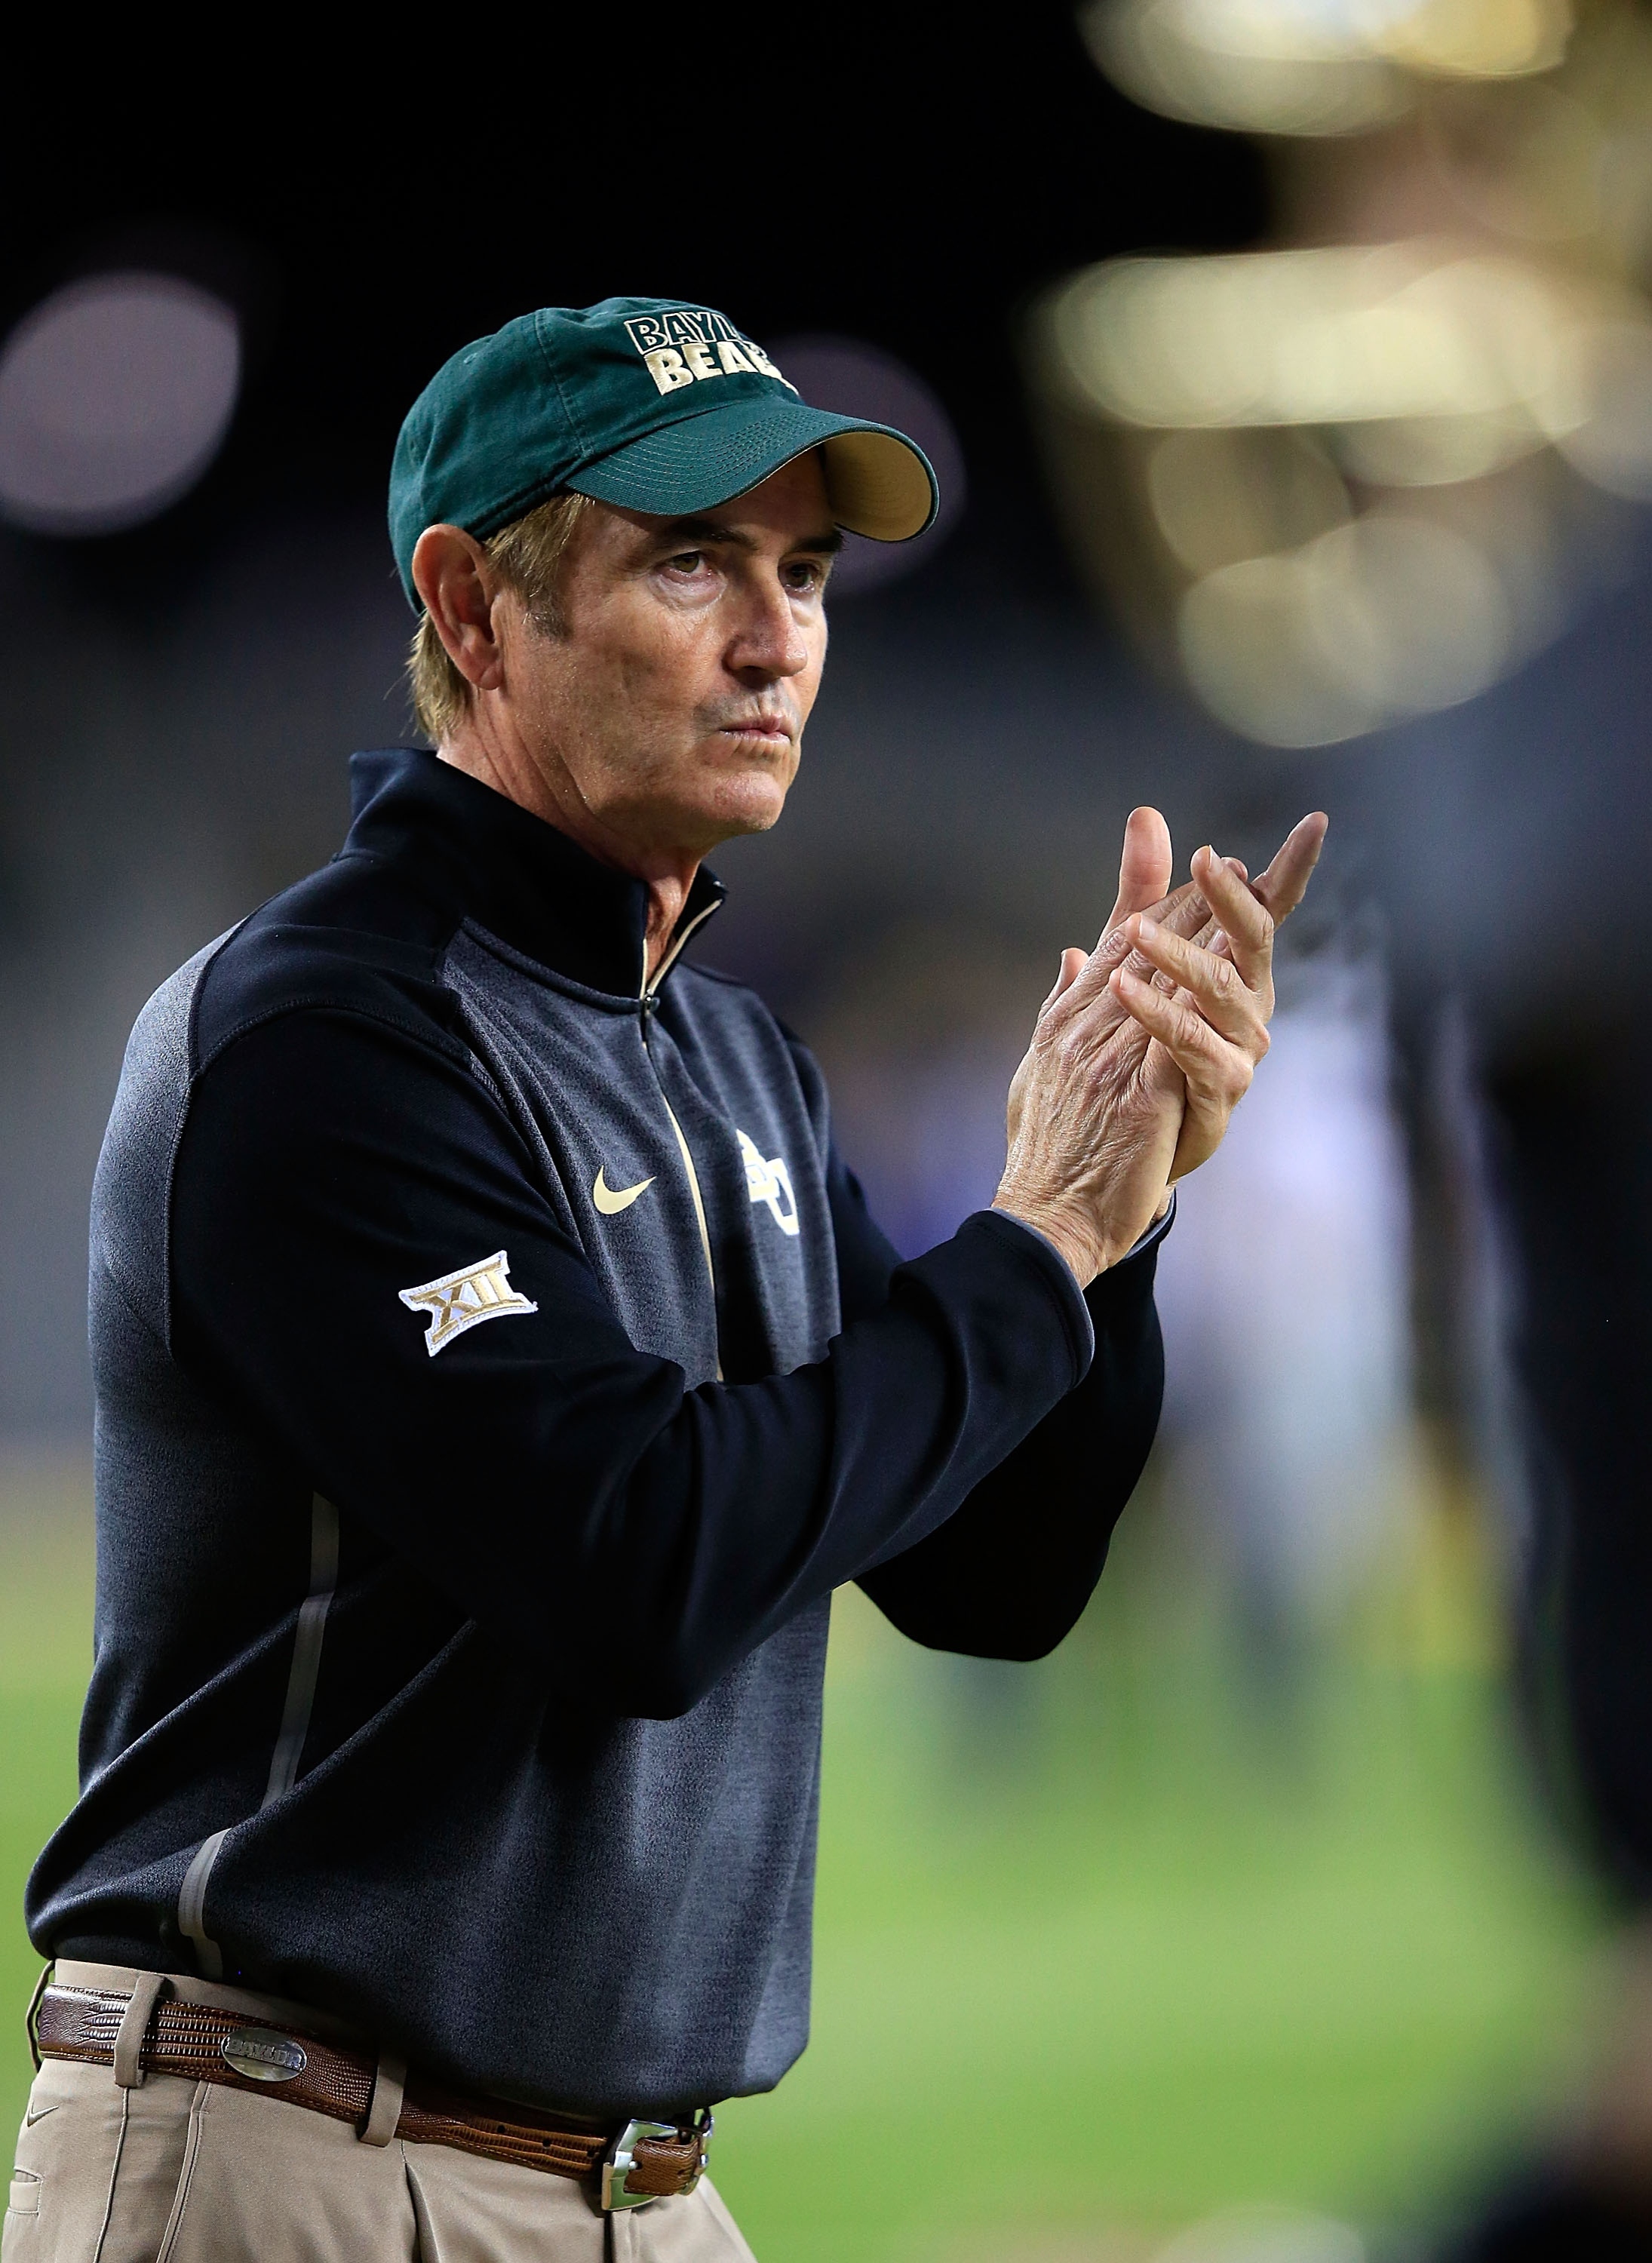 WACO, TX - DECEMBER 06:  Baylor Bears head coach Art Briles watches as his team goes through pregame drills for their game against the  Kansas State Wildcats on December 6, 2014  at McLane Stadium in Waco, Texas.  (Photo by Jamie Squire/Getty Images)